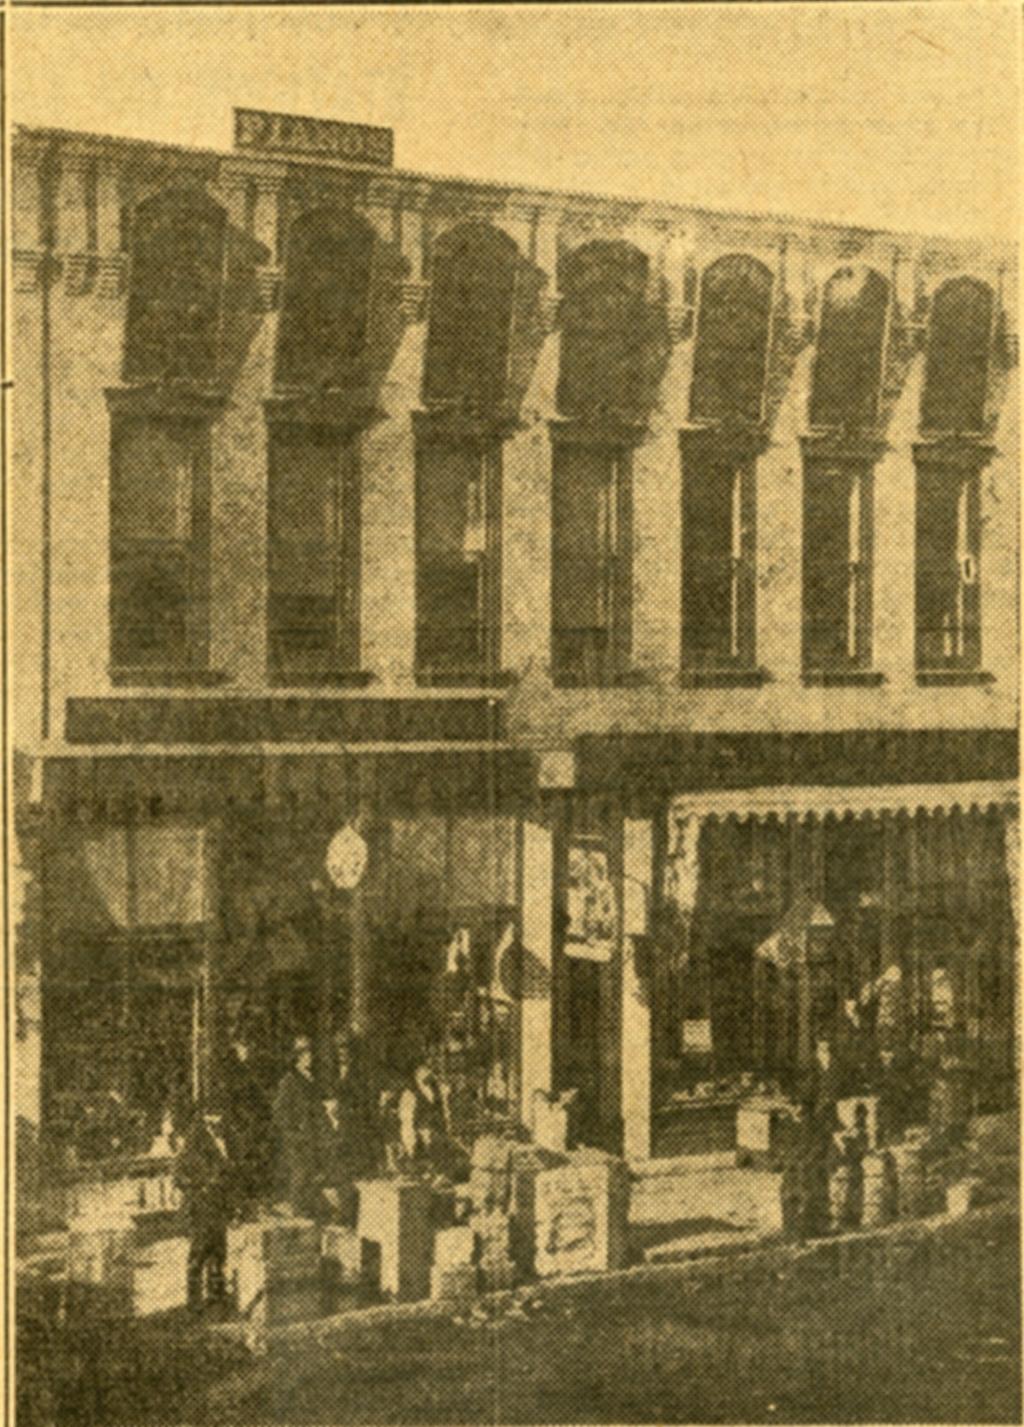 The first two show the Joannes Brothers offices in downtown Green Bay, circa 1920.